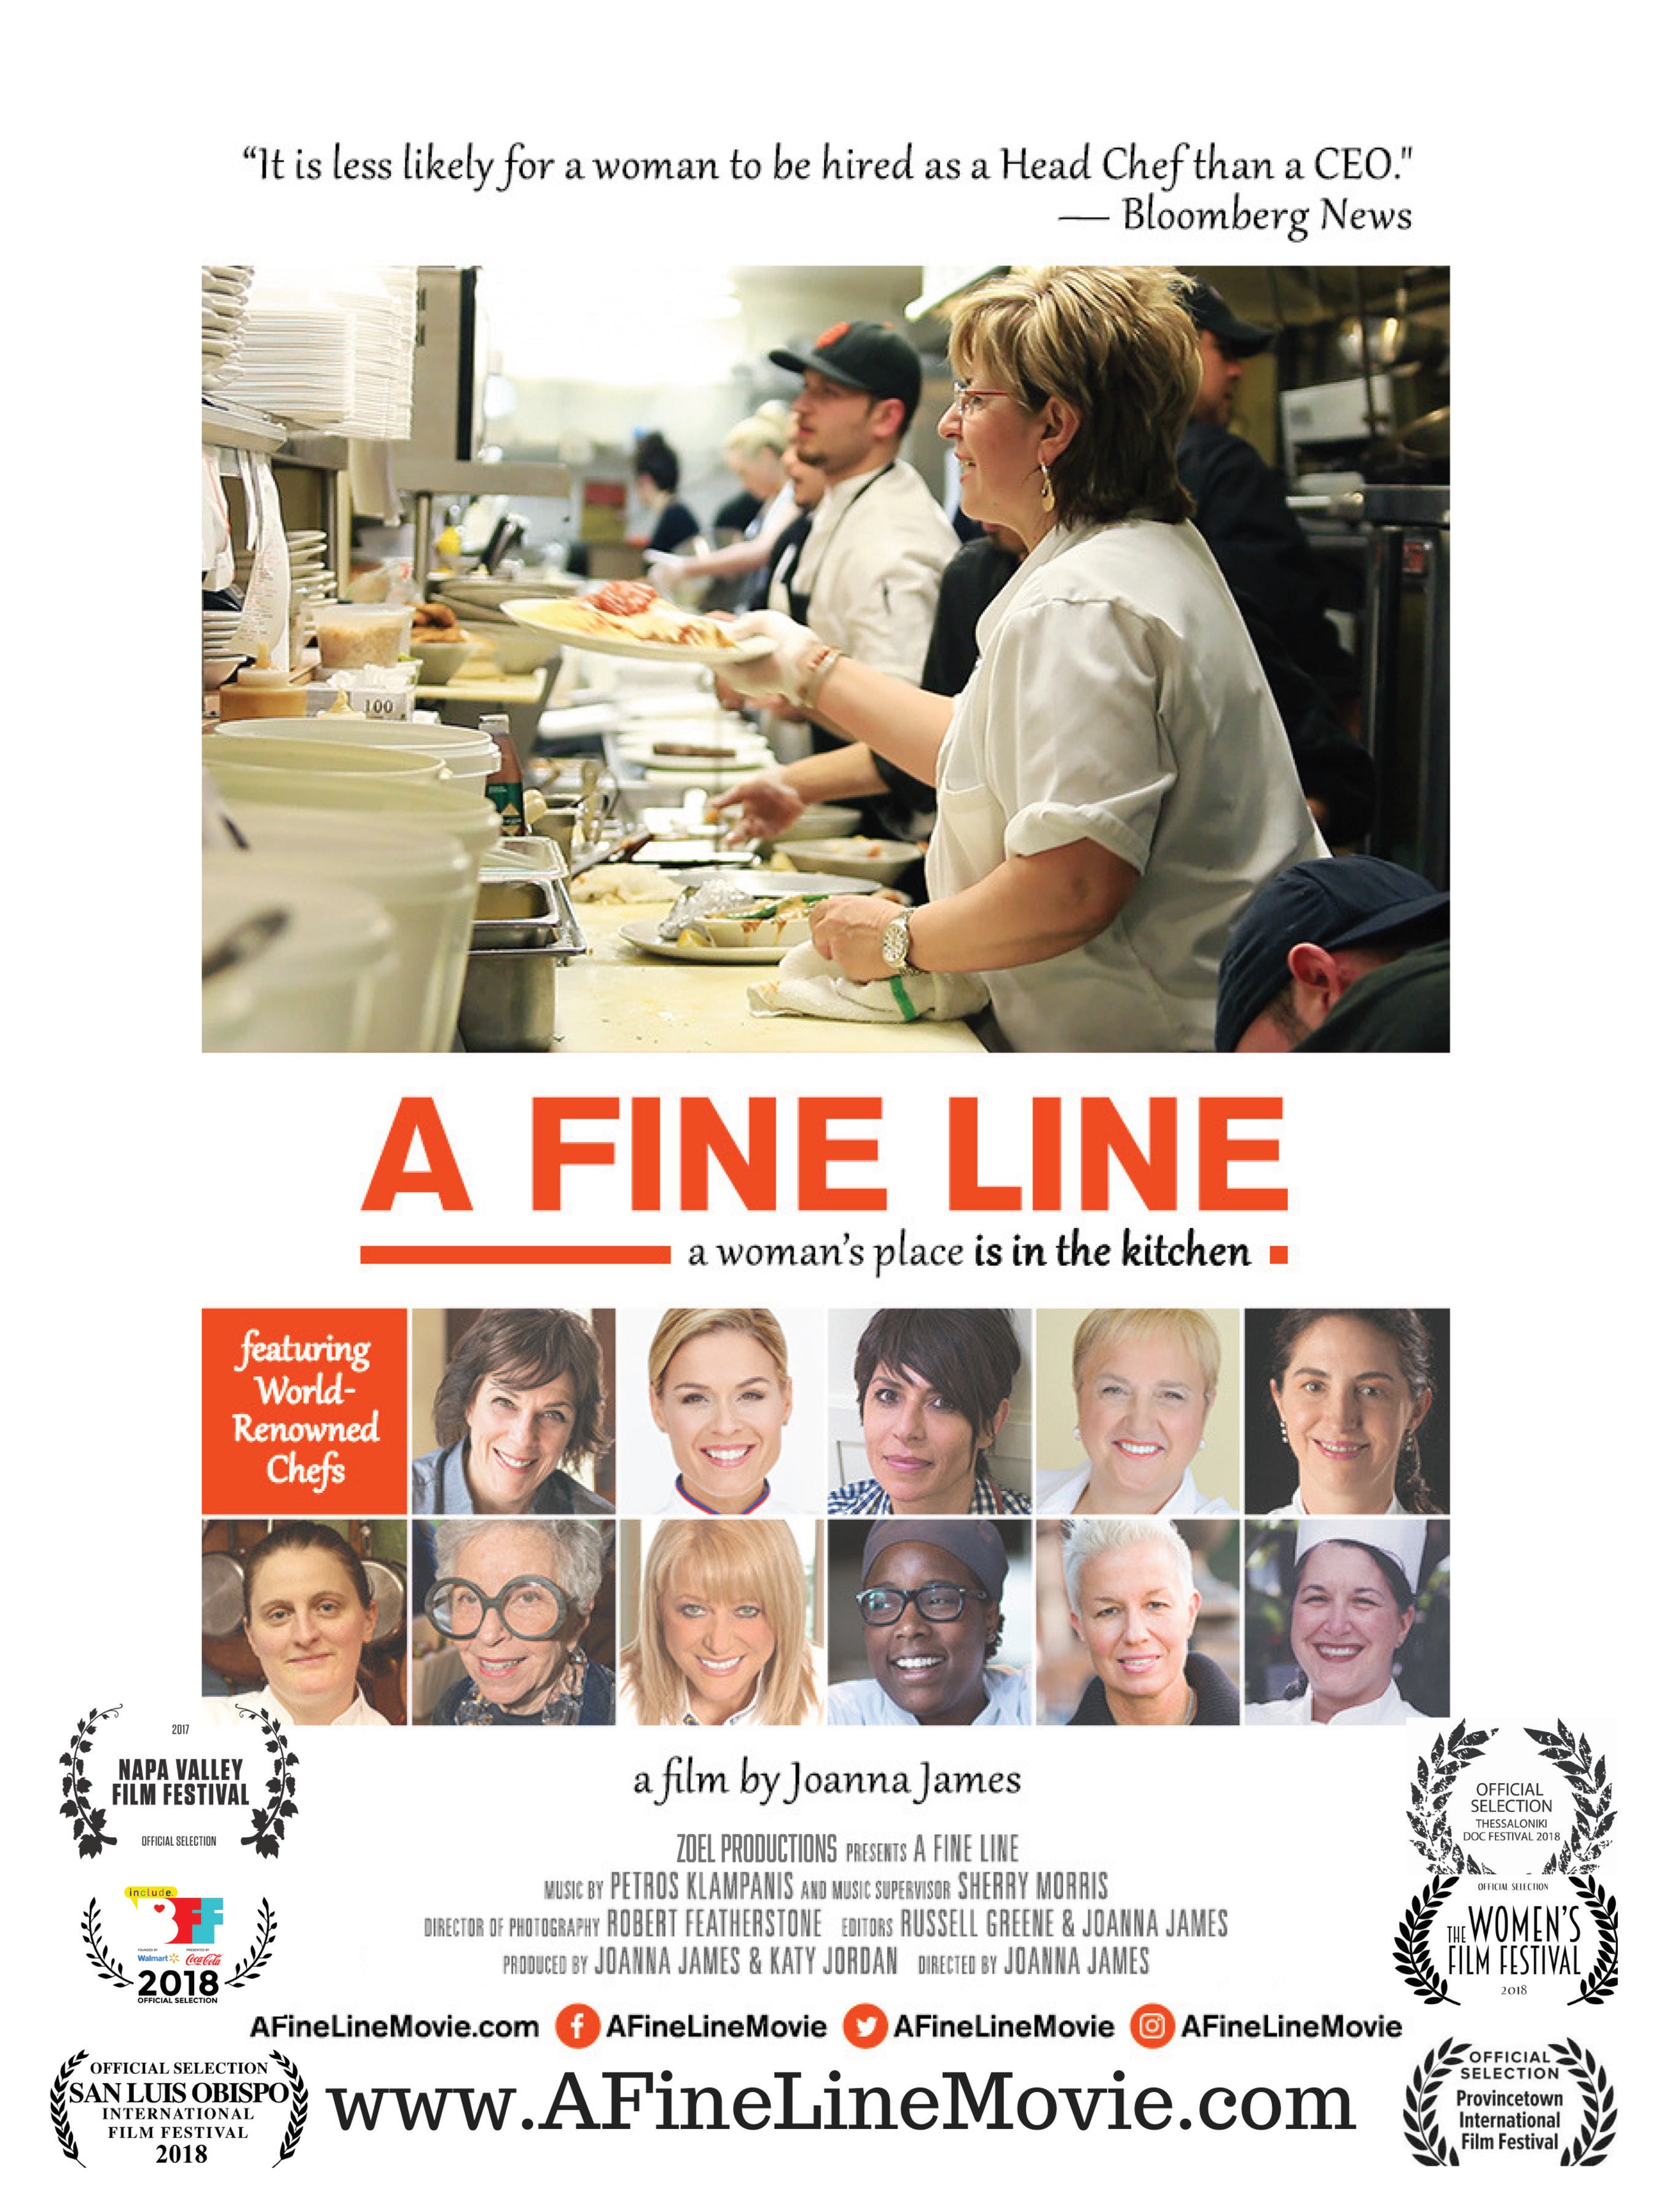 A Fine Line' movie night and call to action - School of Medicine